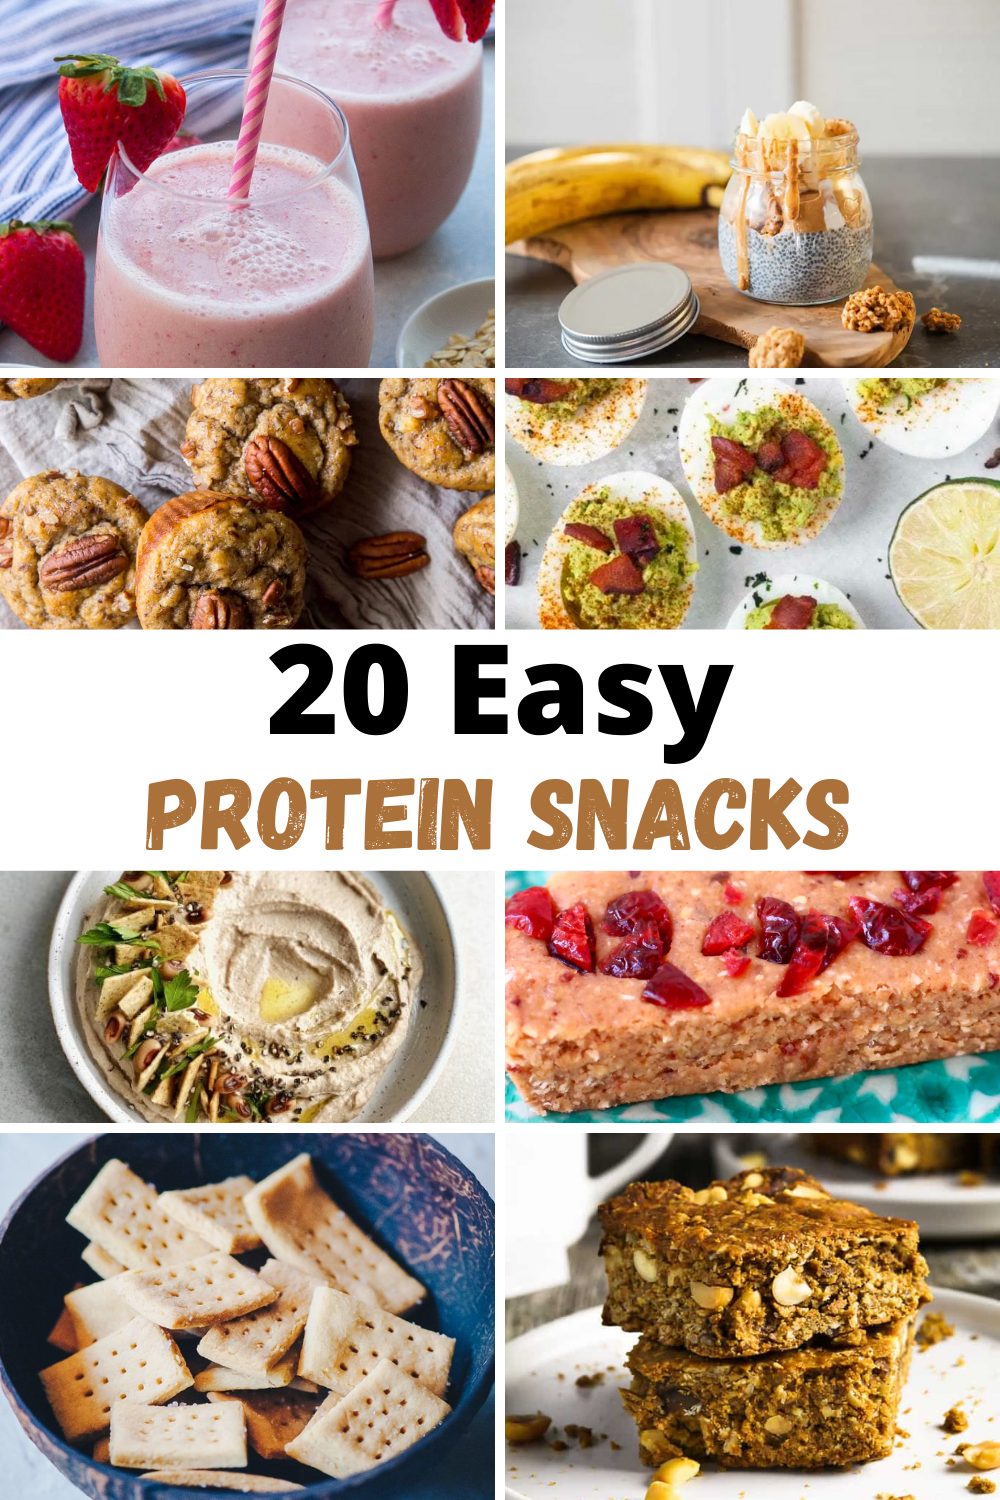 Here's a list of the twenty best protein snacks that are healthy, tasty and will keep you from ruining your diet in between meals. #bestproteinsnacks #easyproteinsnacks  via @mymommystyle